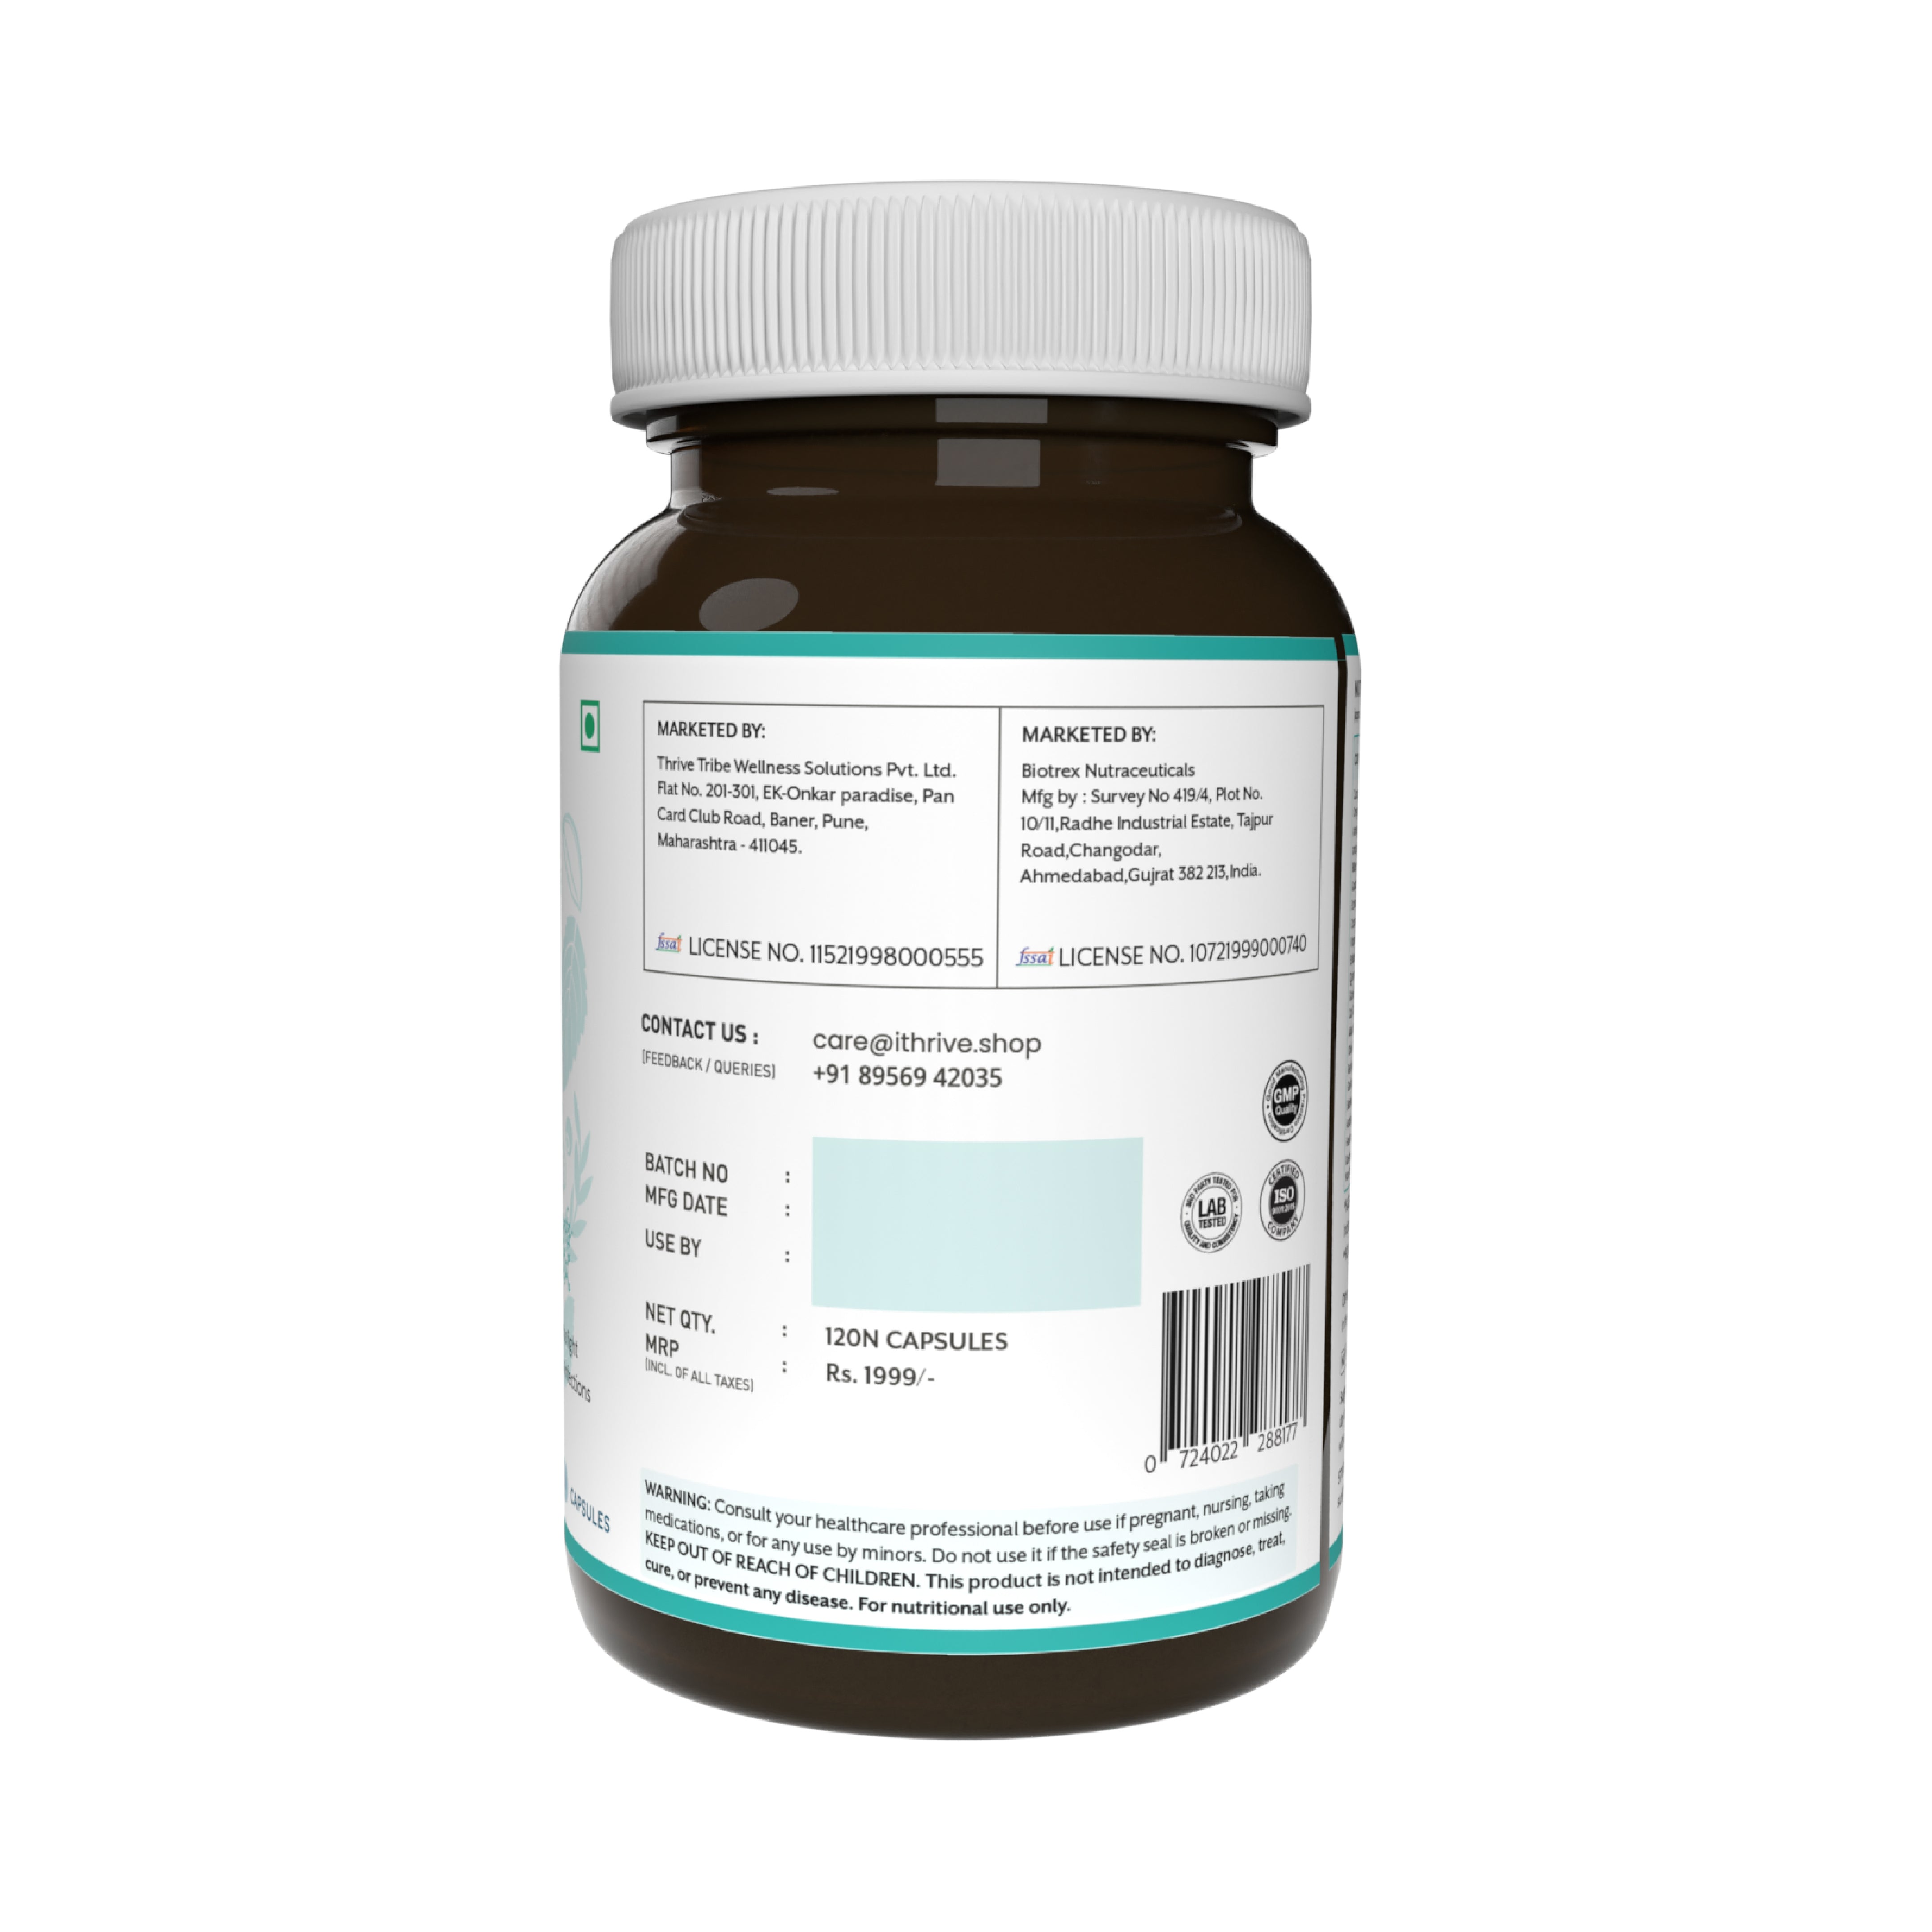 mrp and barcode of ithrive essentials immune support supplement